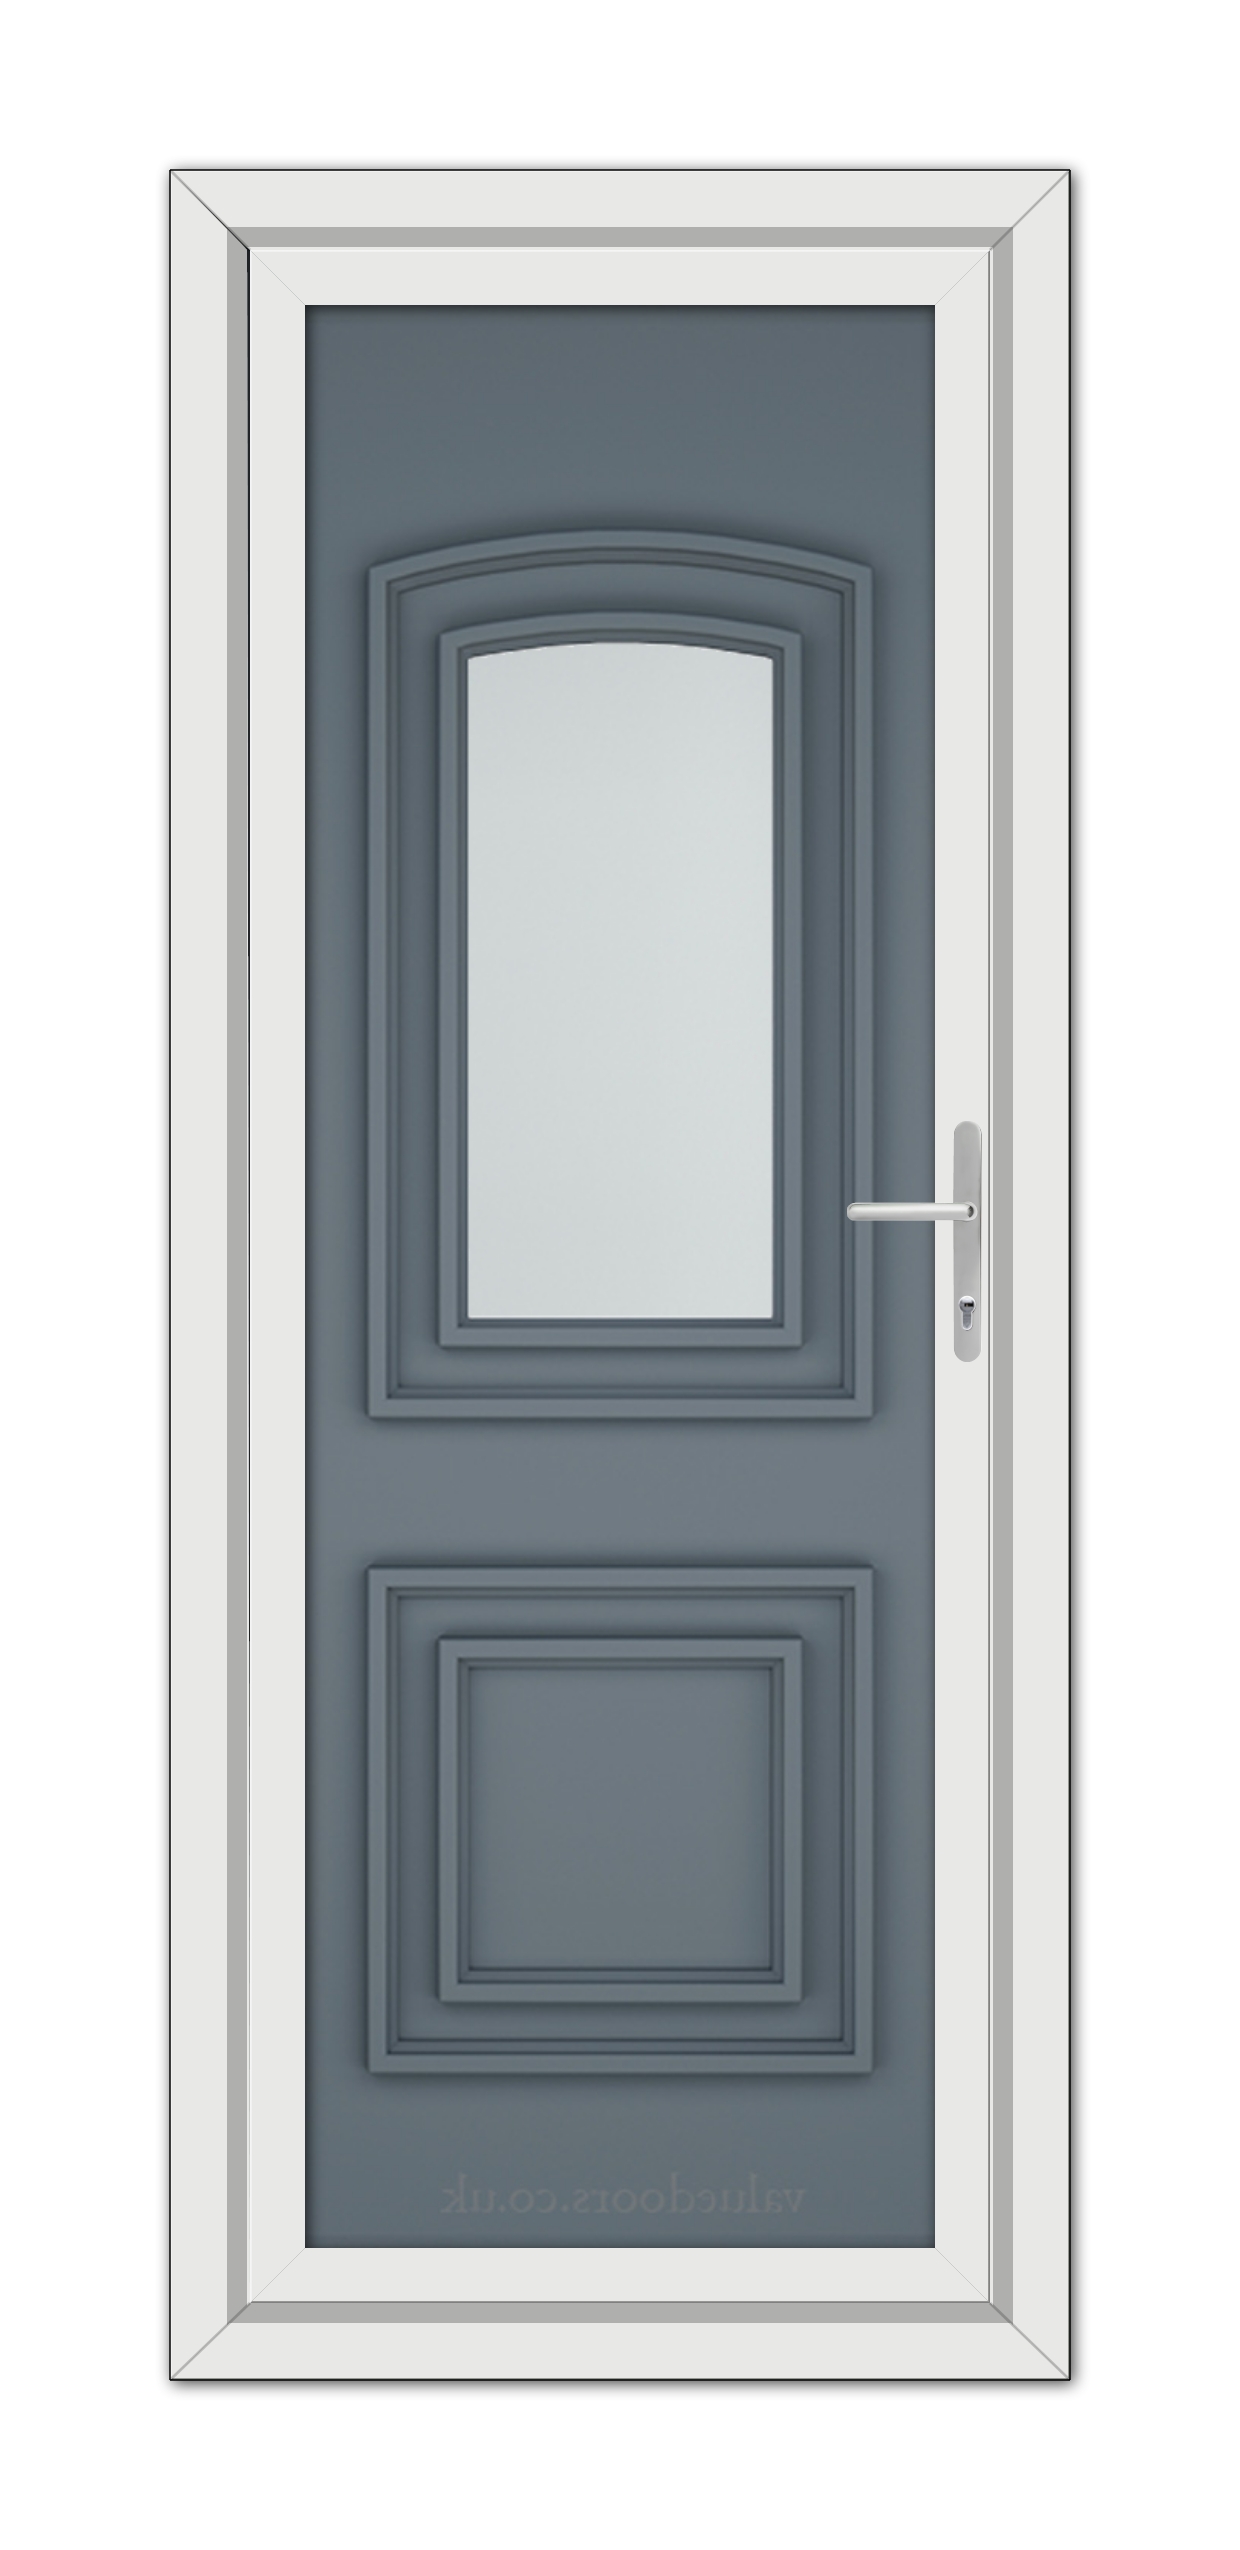 A Slate Grey Balmoral One uPVC door with a glass panel.